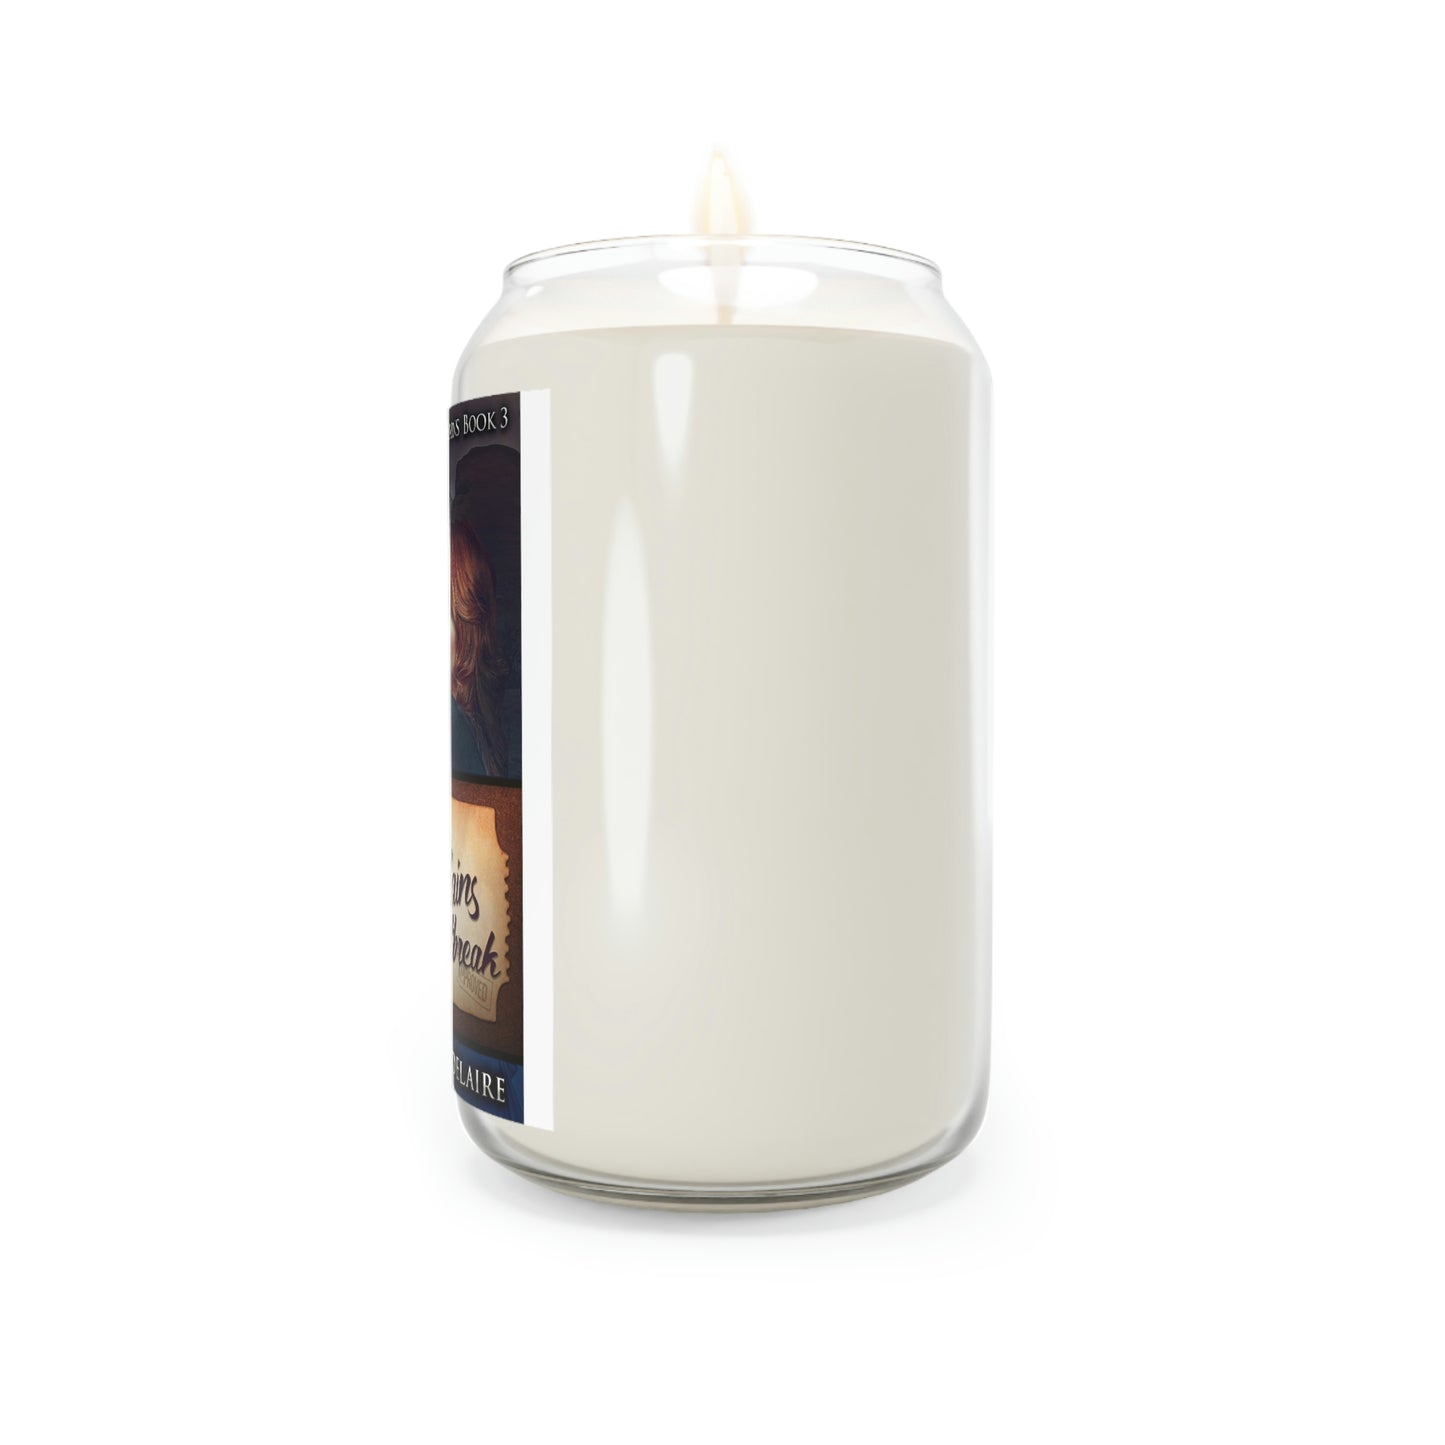 High Plains Heartbreak - Scented Candle